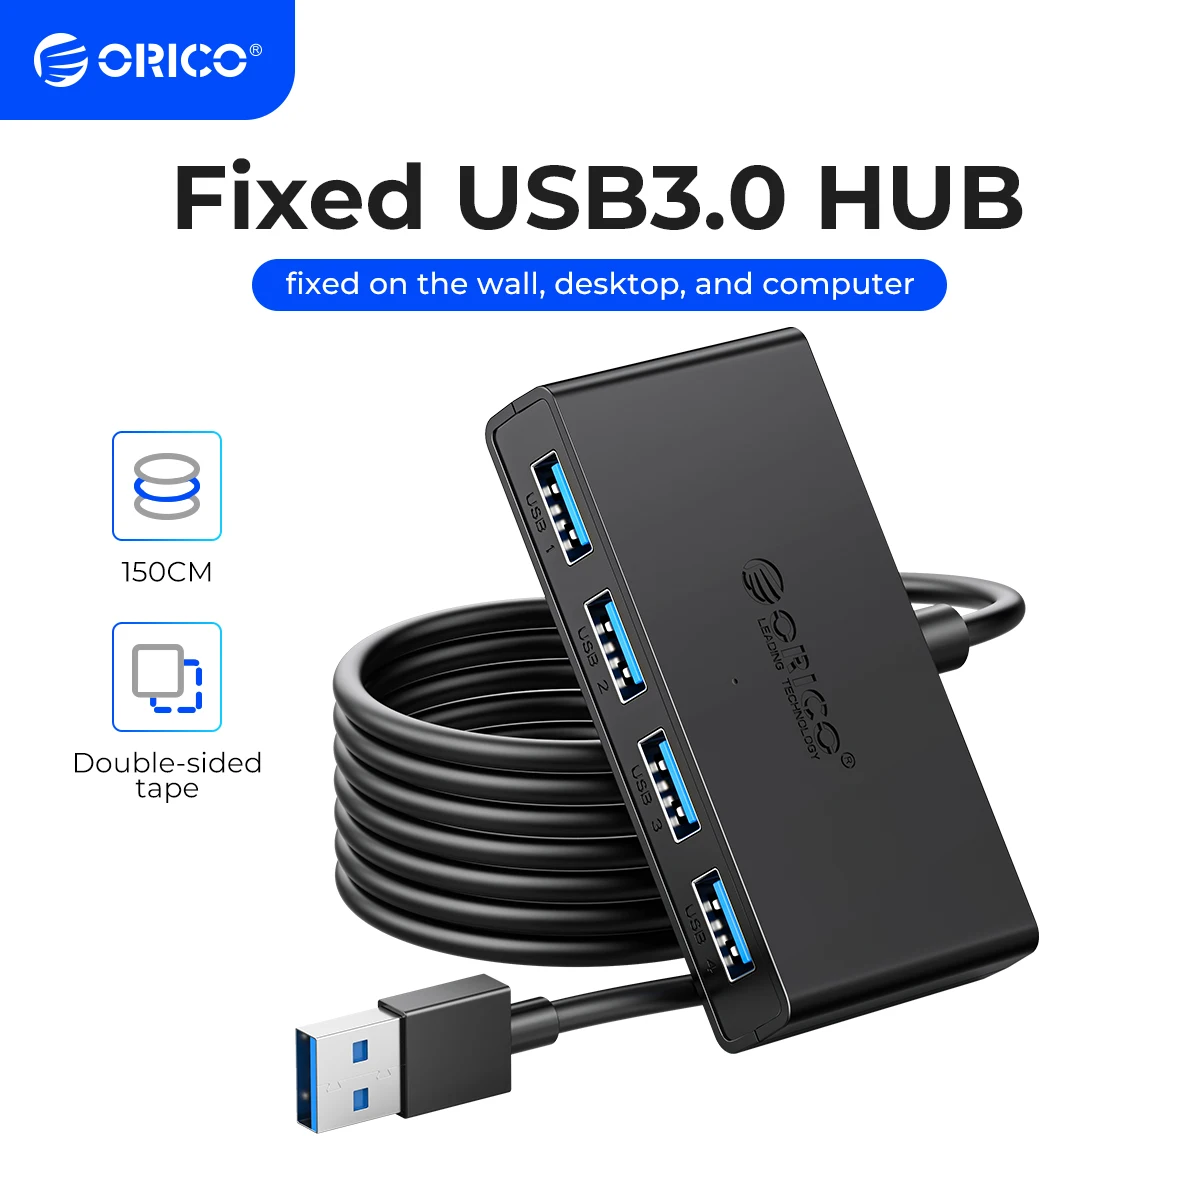 

ORICO 4 Ports USB 3.0 Hub with Micro Power Supply Port Multi USB 3.0 Splitter Adapter For Desktop PC Macbook Pro Mobile HDD SSD